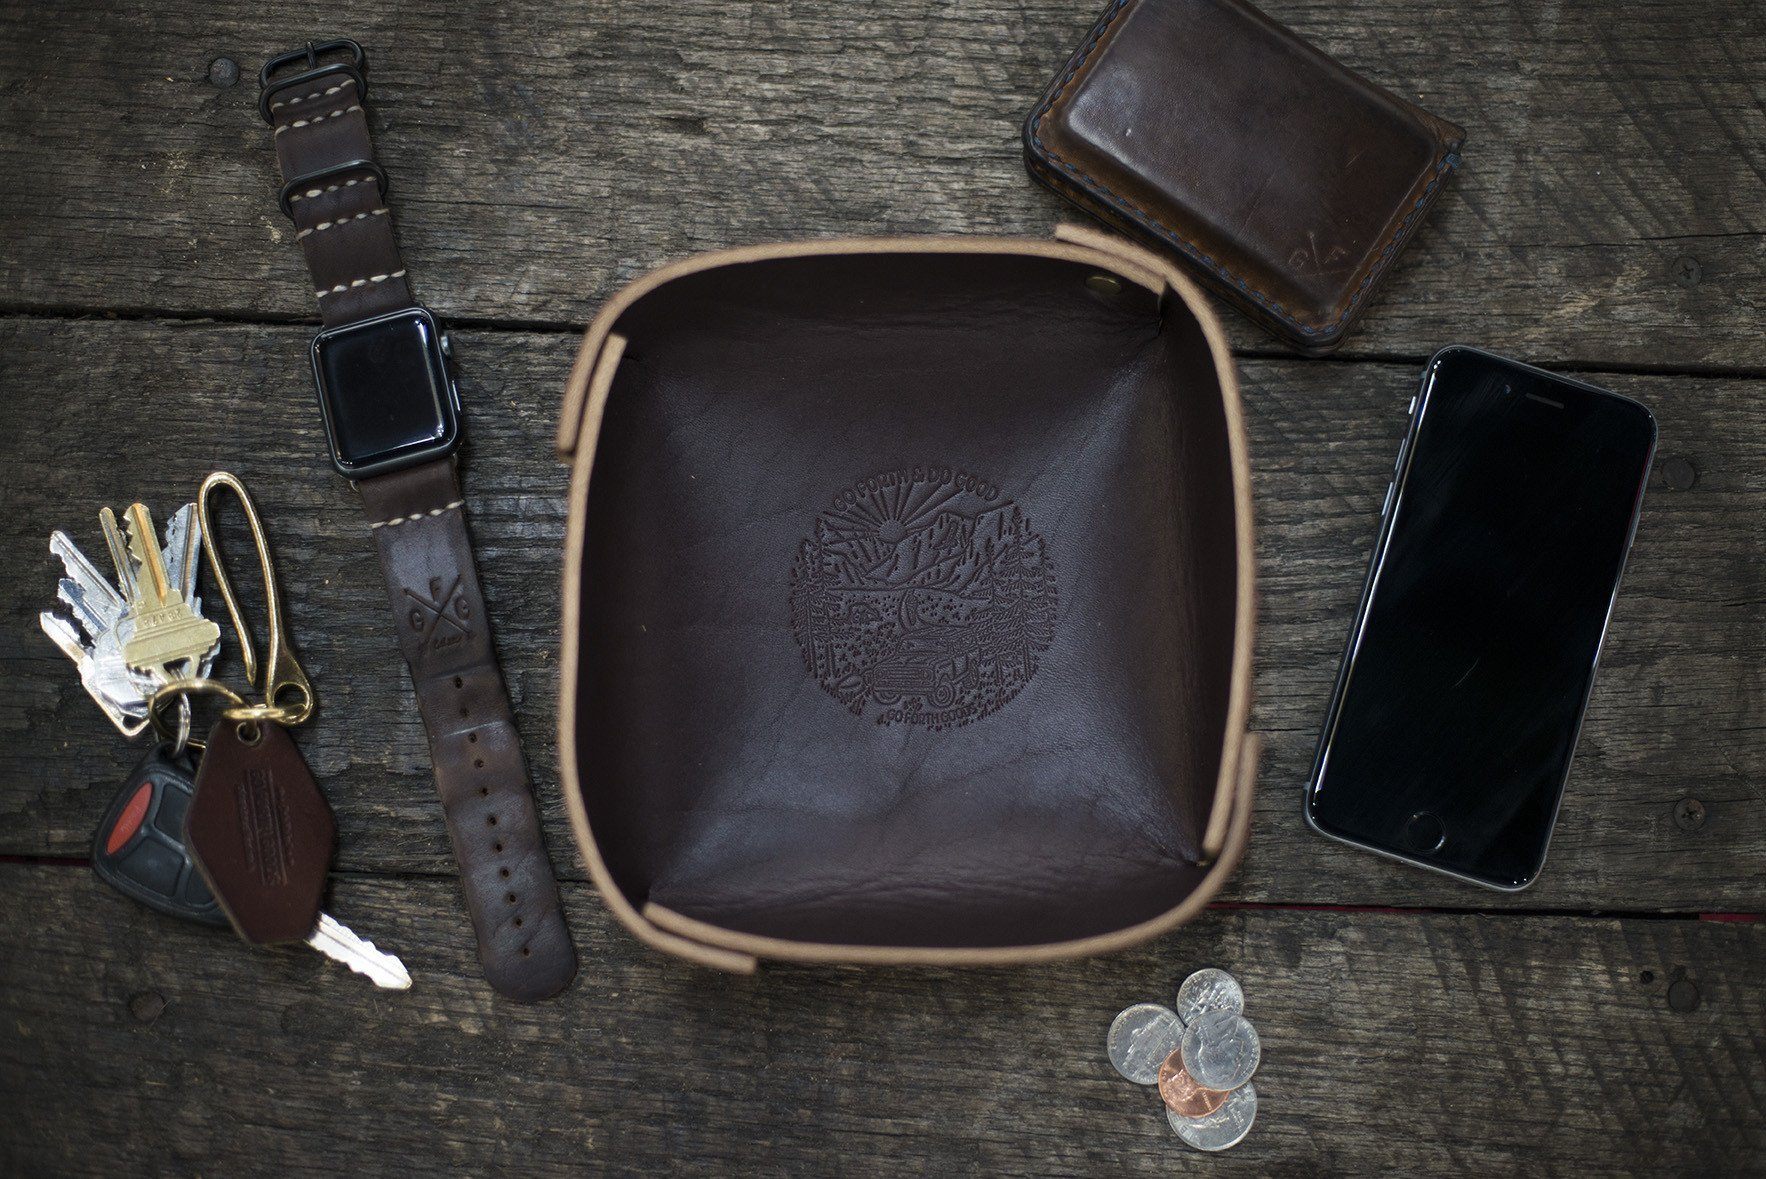 LEATHER VALET TRAY